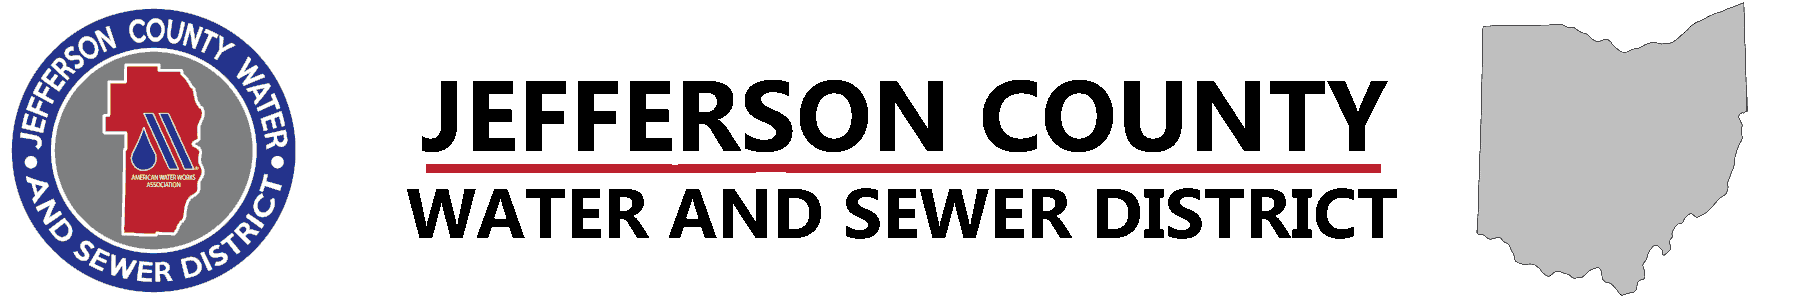 Jefferson County Water and Sewer District